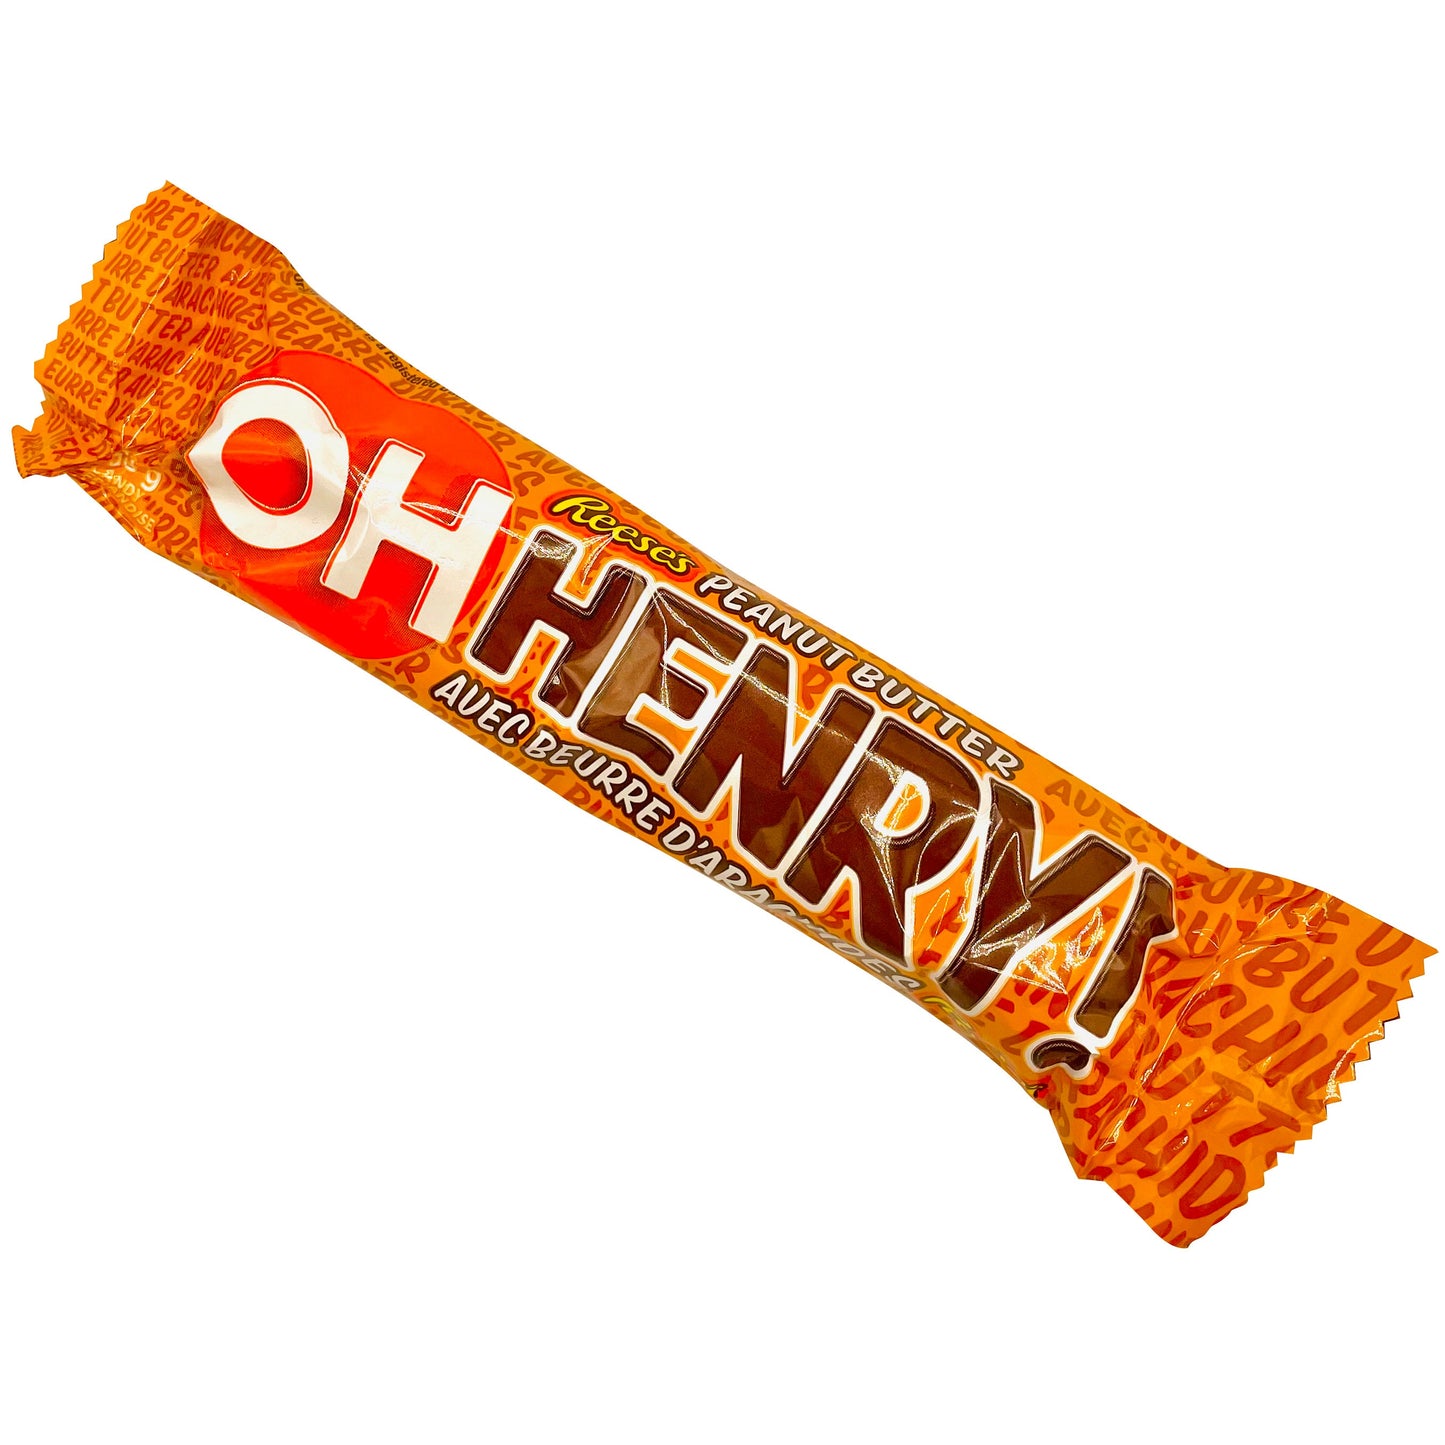 OH HENRY! Bar (Reese's) - Sugar Rushed